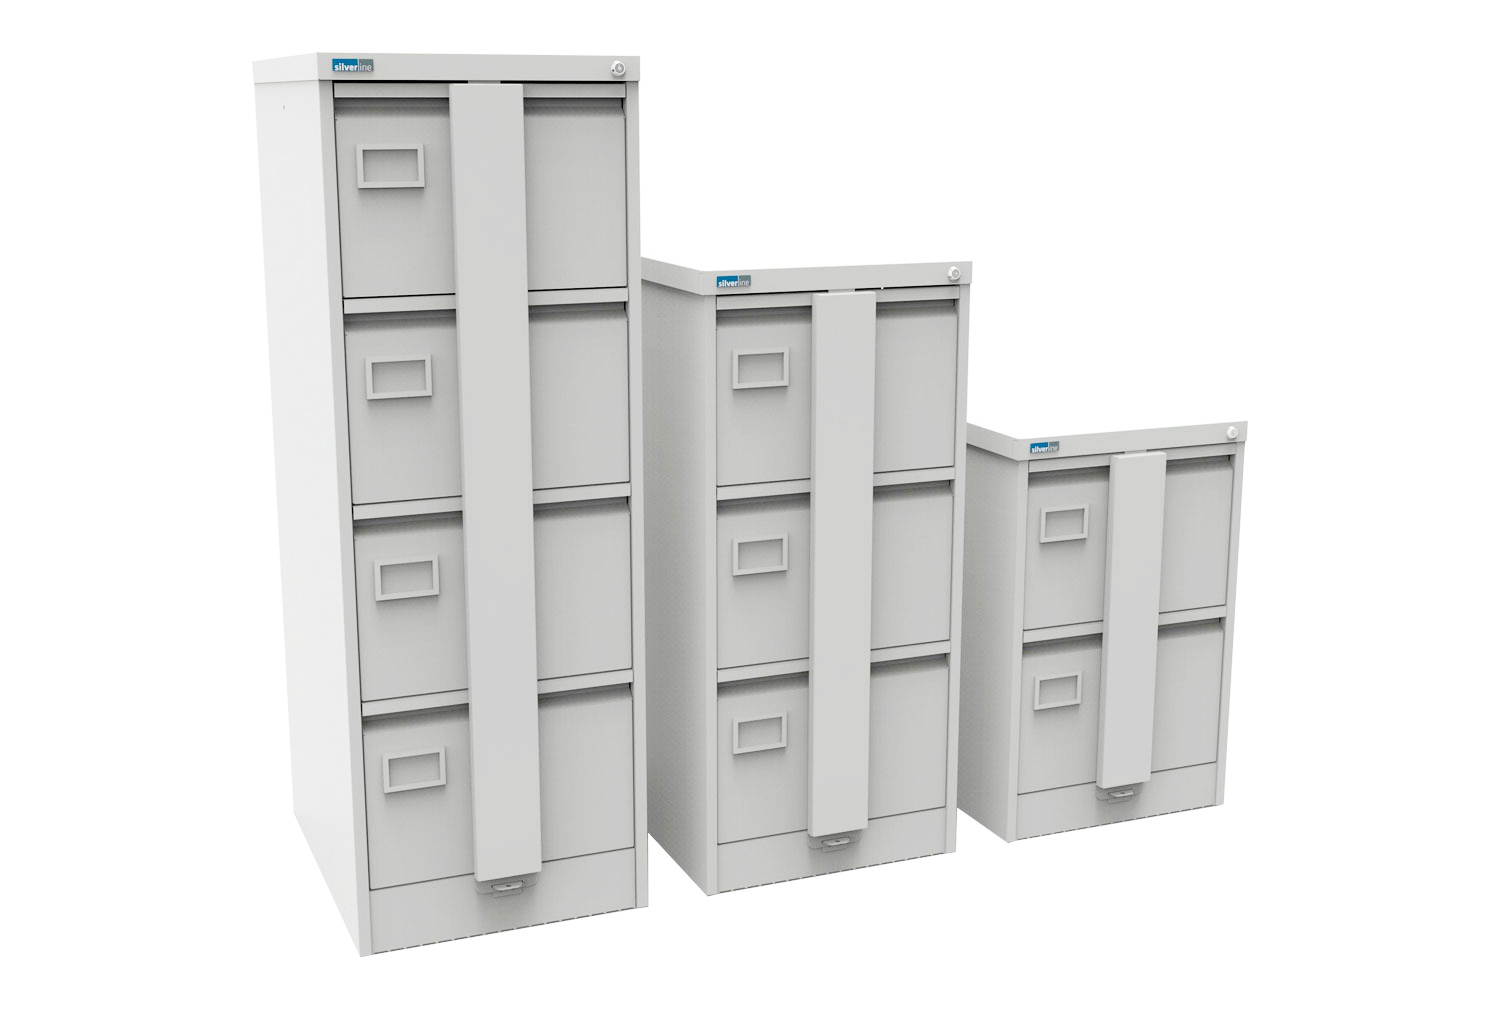 Silverline Secure Executive 4 Drawer Filing Cabinets, 4 Drawer - 46wx62dx132h (cm), Light Grey, Fully Installed